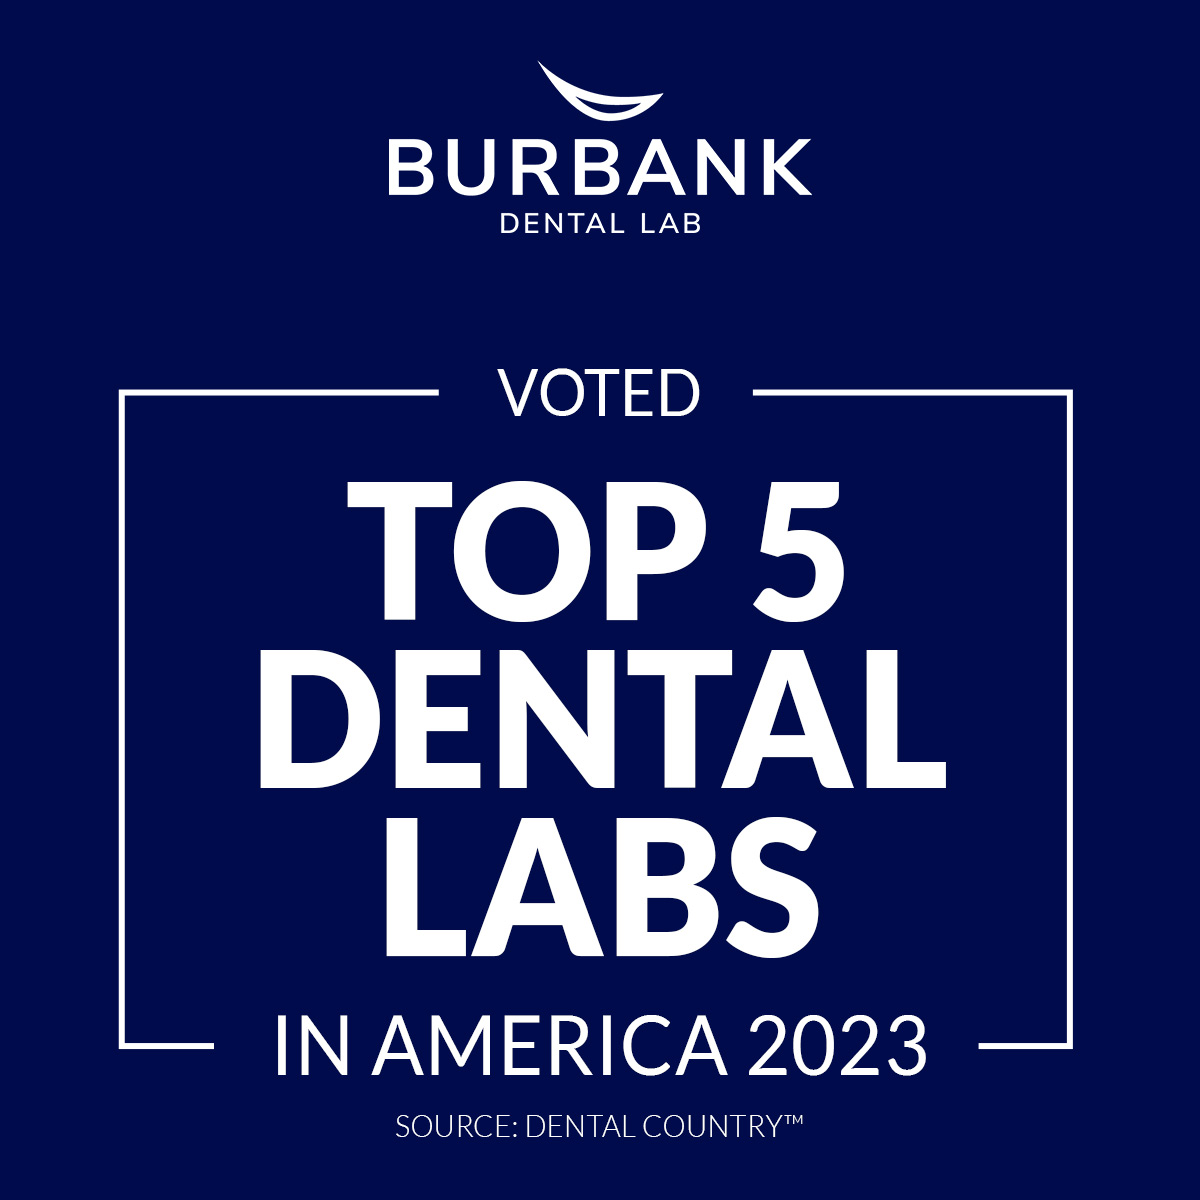 Voted Top 5 Dental Labs in America 2023 -- Source: Dental Country